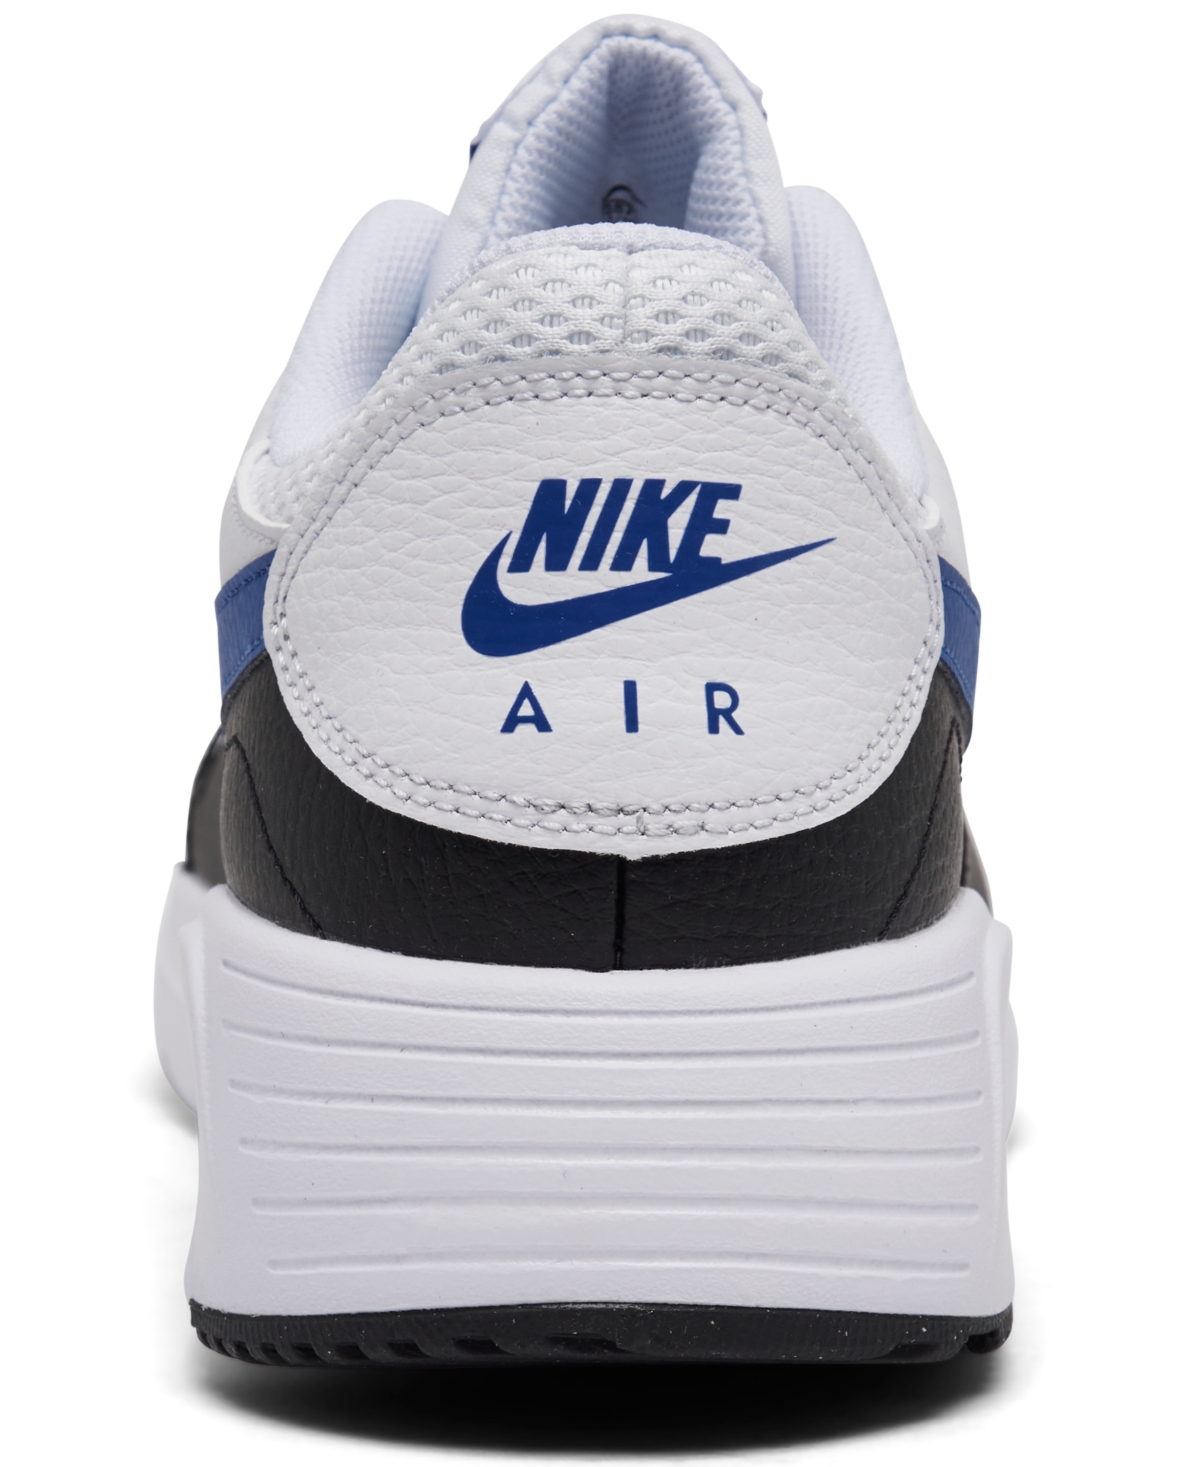 Shop Nike Men's Air Max Sc Casual Sneakers From Finish Line In White,game Royal,black